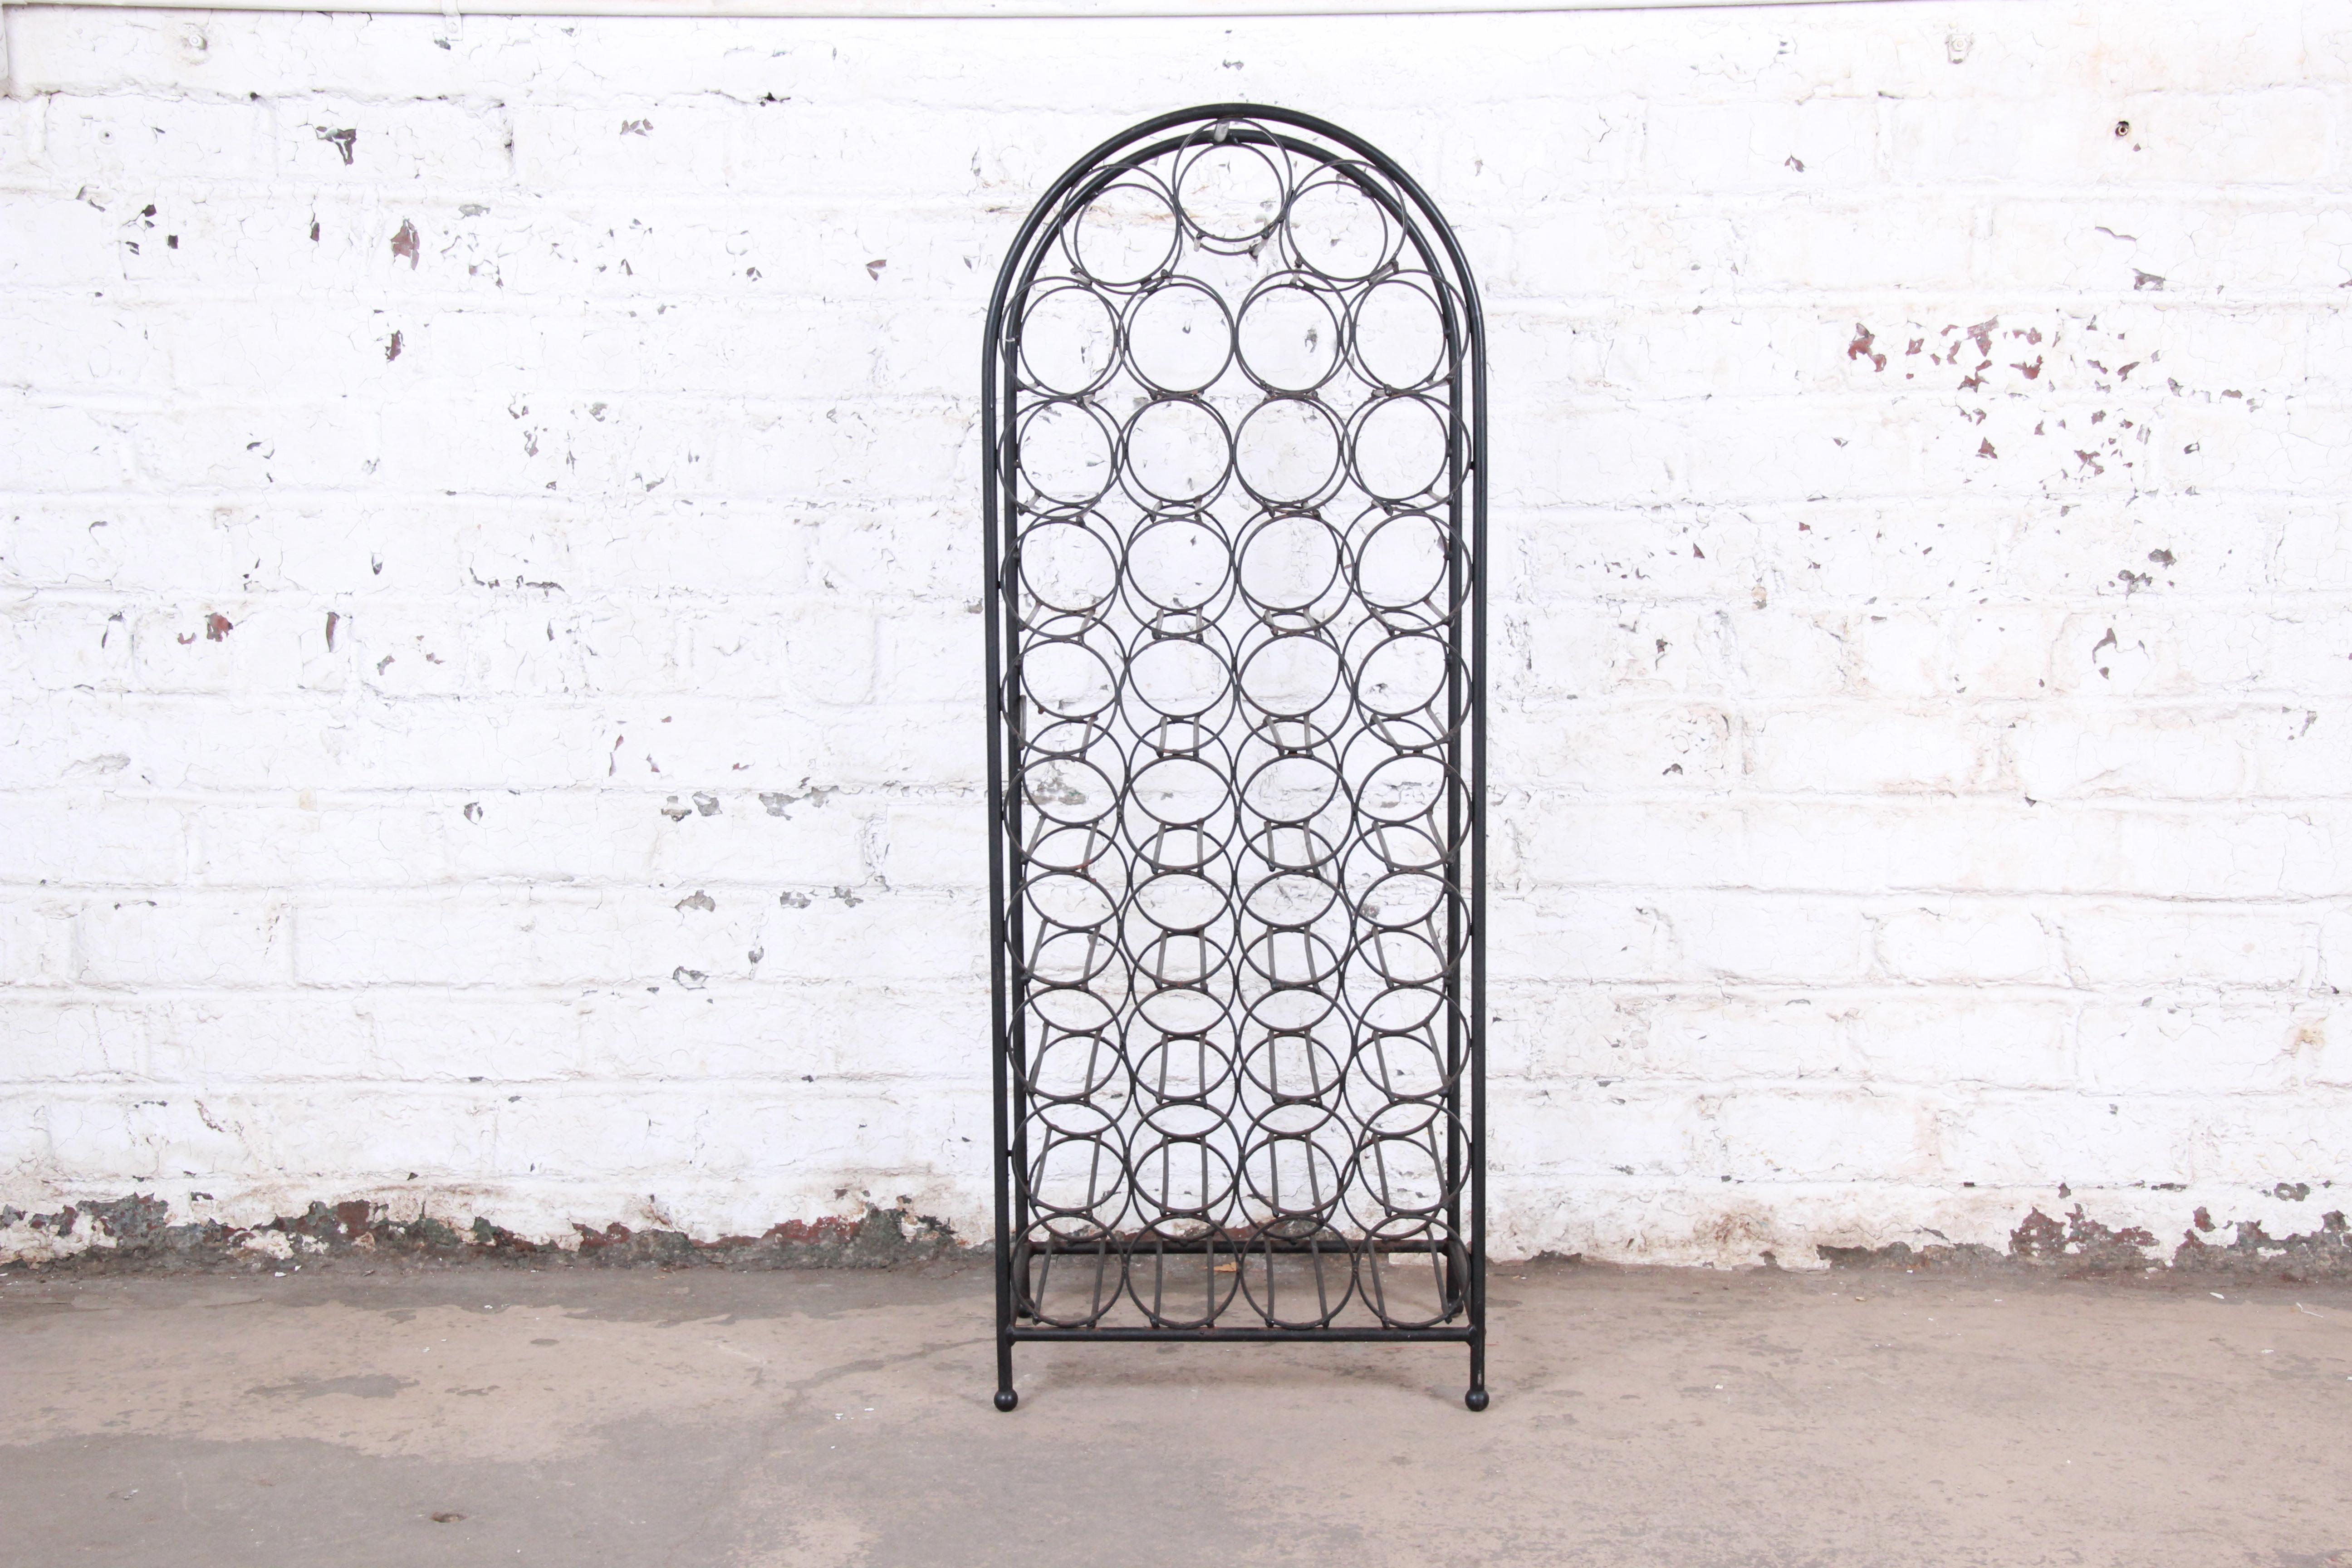 A unique Mid-Century Modern freestanding 39-bottle wine rack designed by Arthur Umanoff. The rack has a heavy wrought iron frame with a stylish arched top. It is sturdy and in very good original vintage condition, with normal wear and patina from